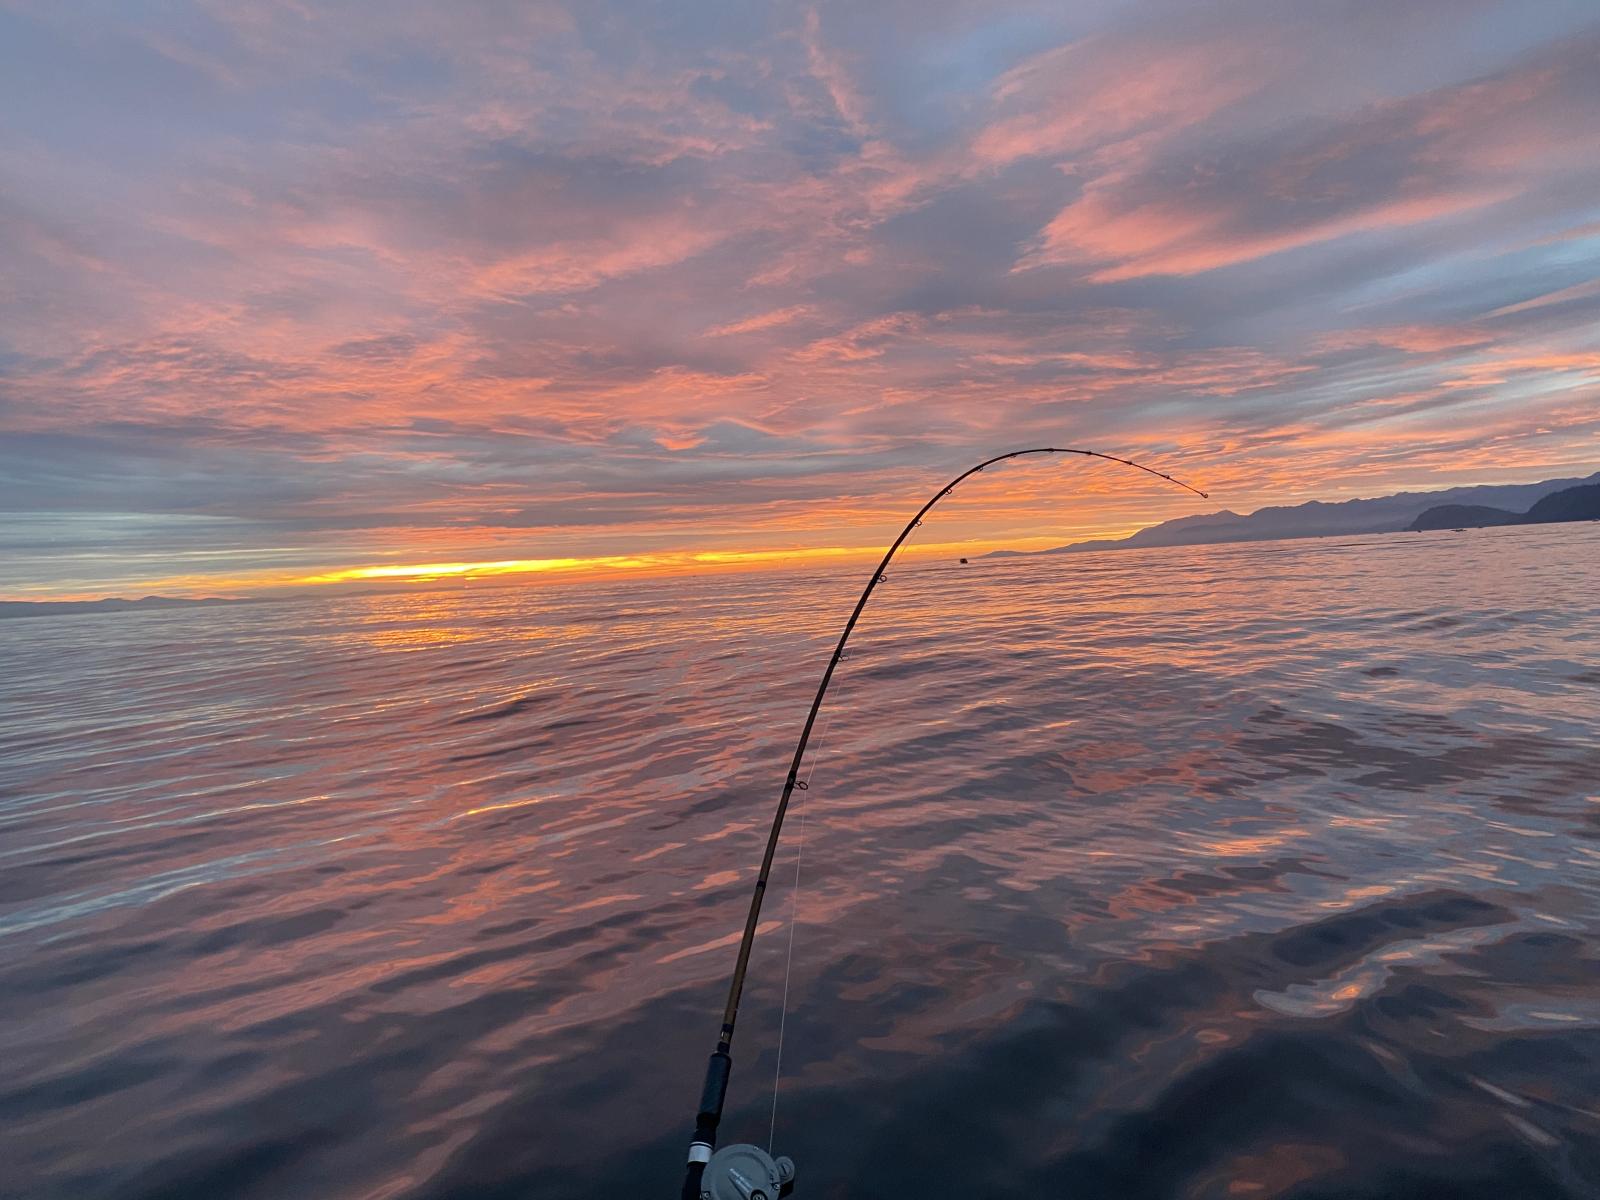 Sunrise over open water with fishing rod in center